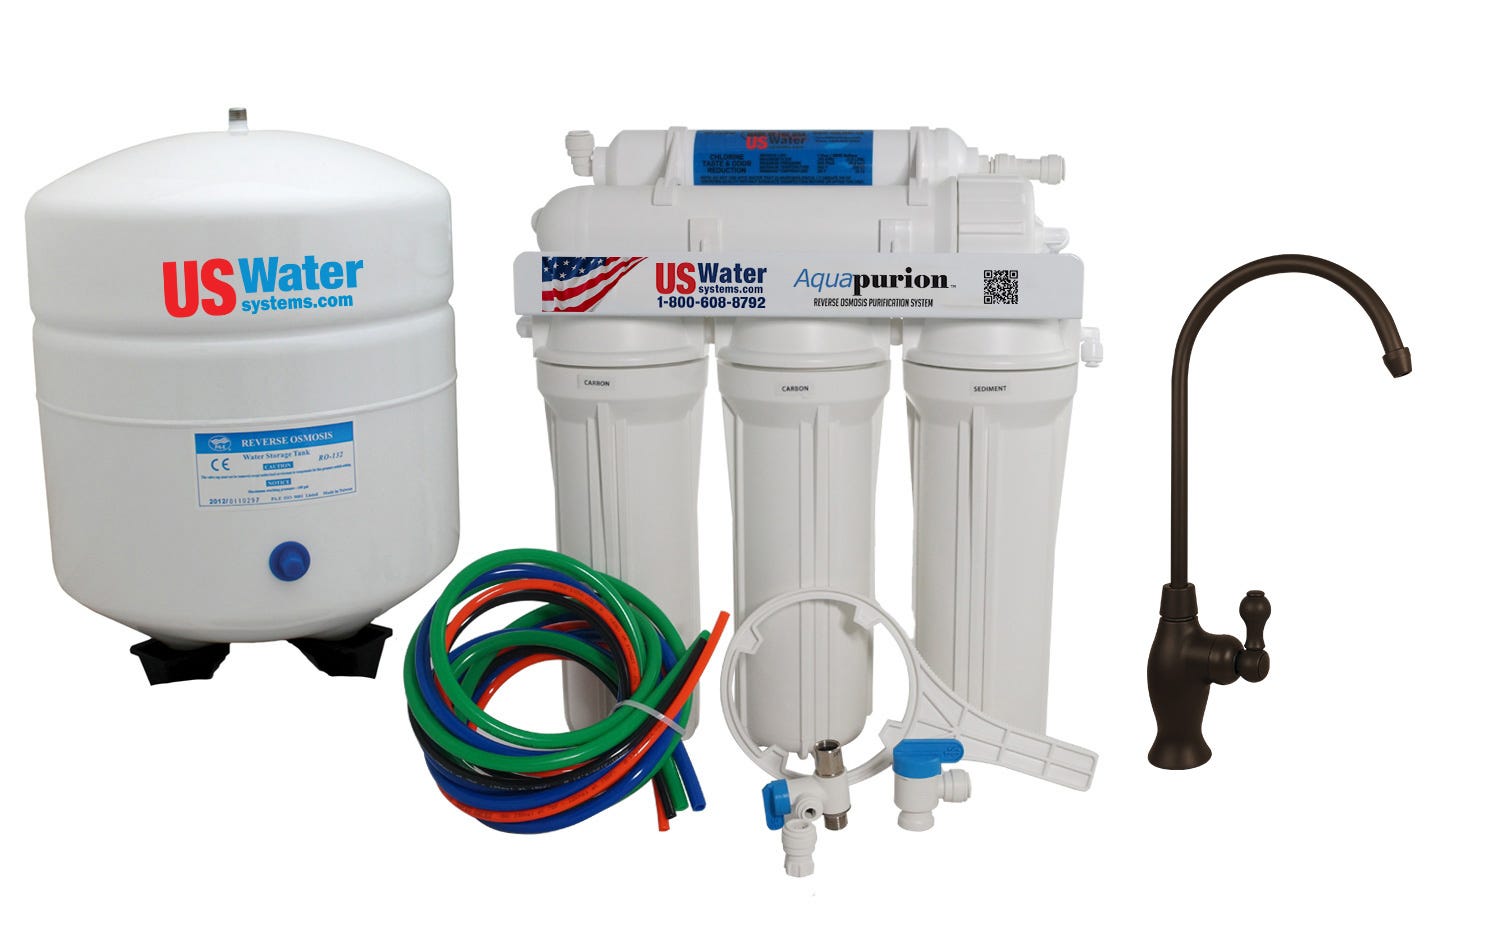 US Water Aquapurion 5-Stage Reverse Osmosis System With Enhanced Fluoride Removal